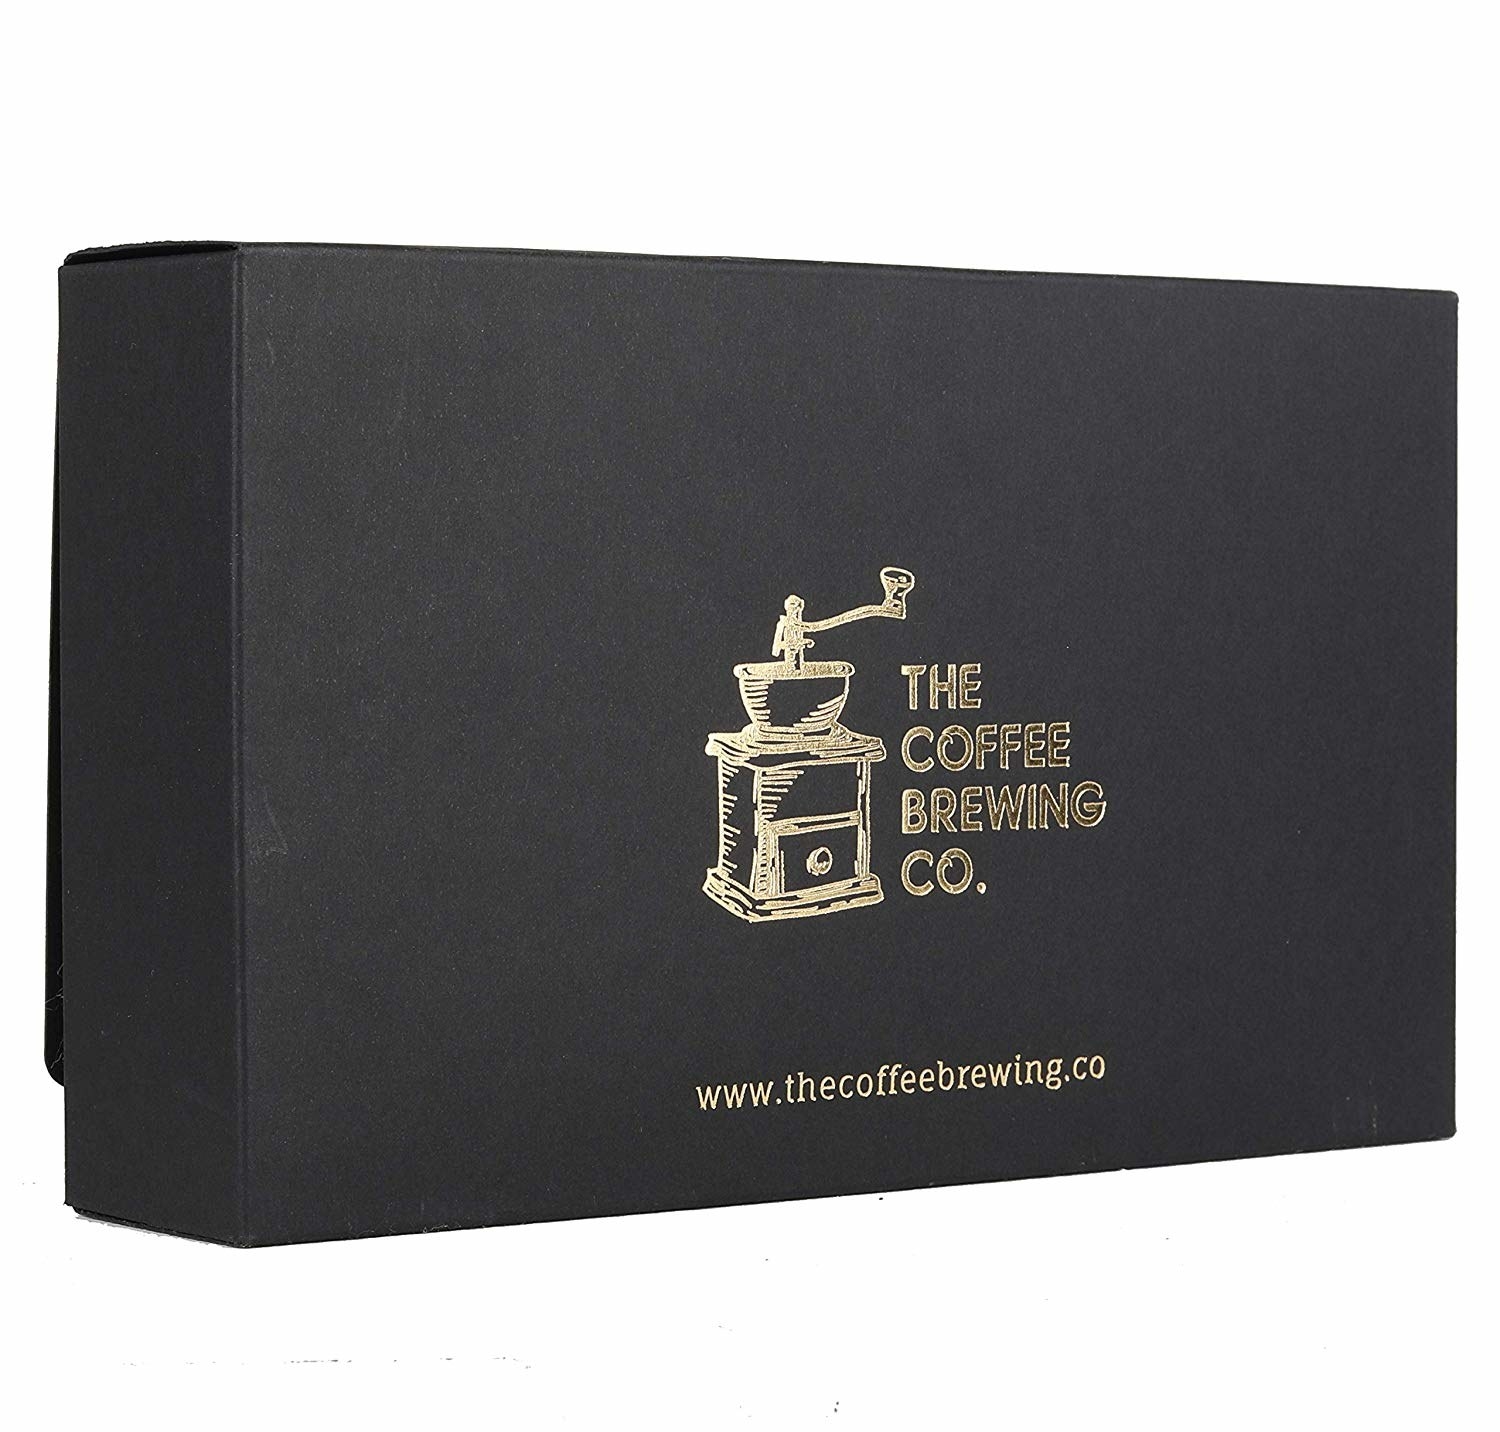 Box of the coffee gift set